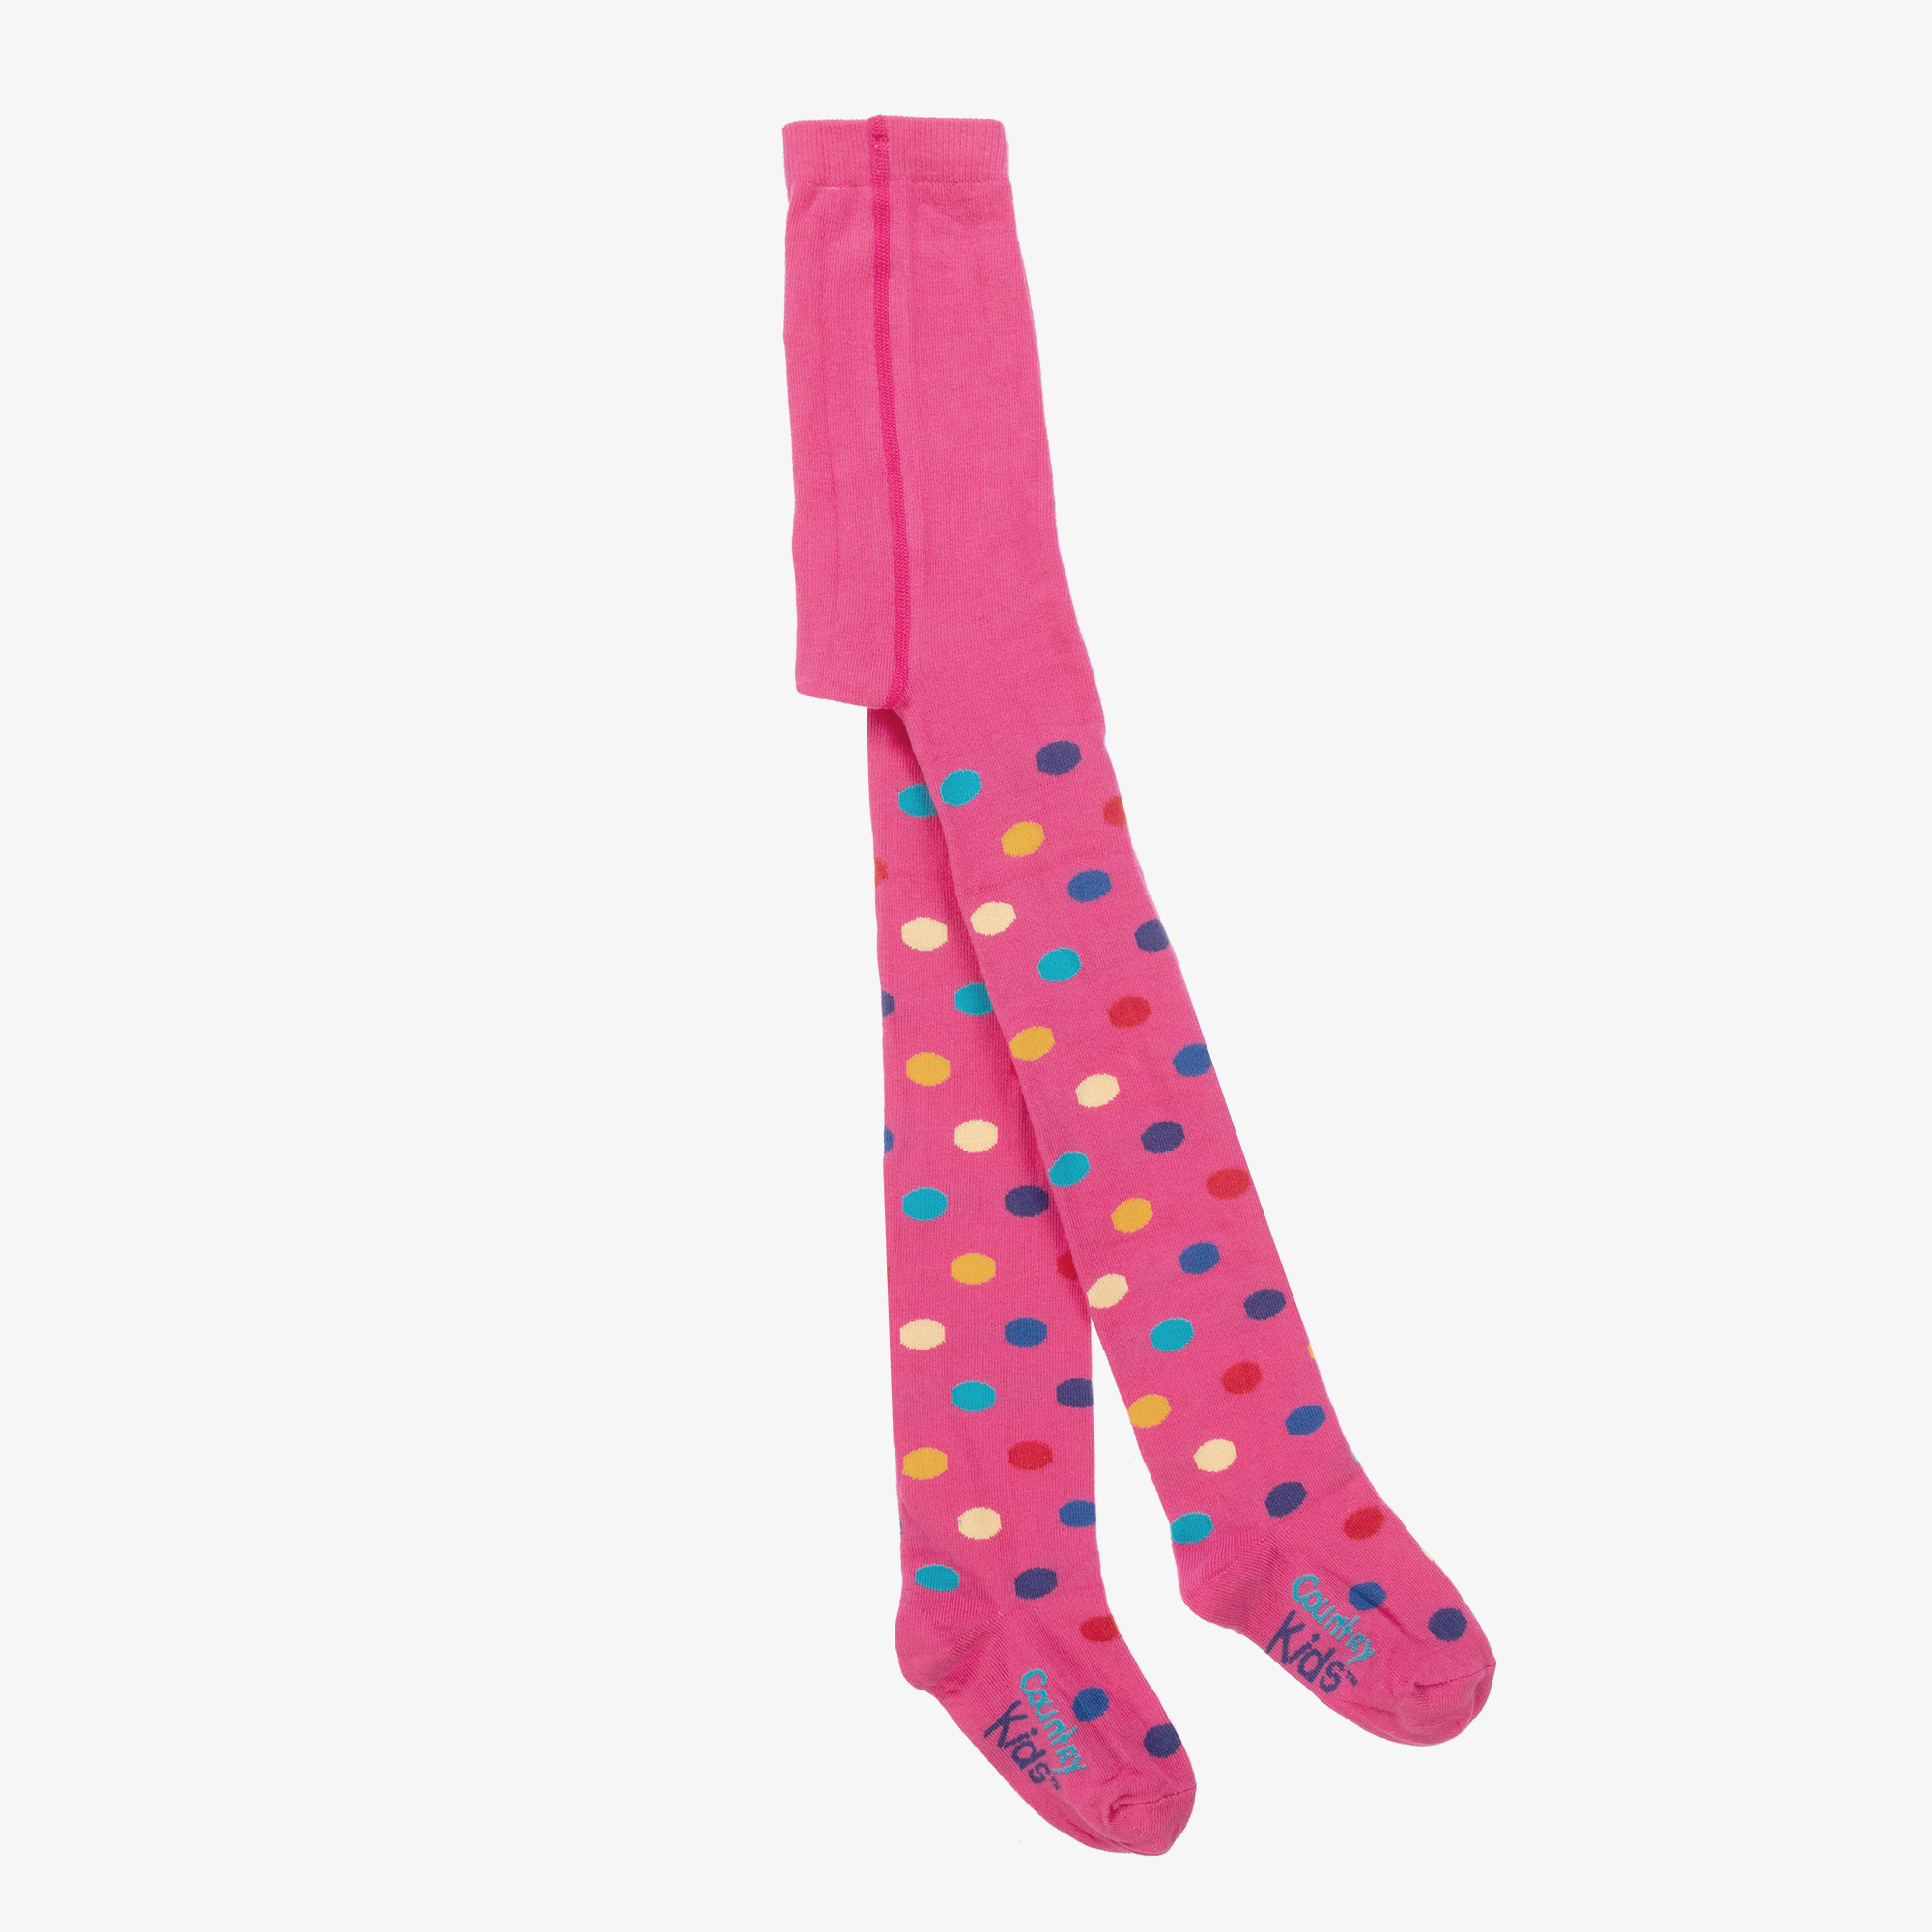 Country Kids Girls Pink Cotton Knitted Tights